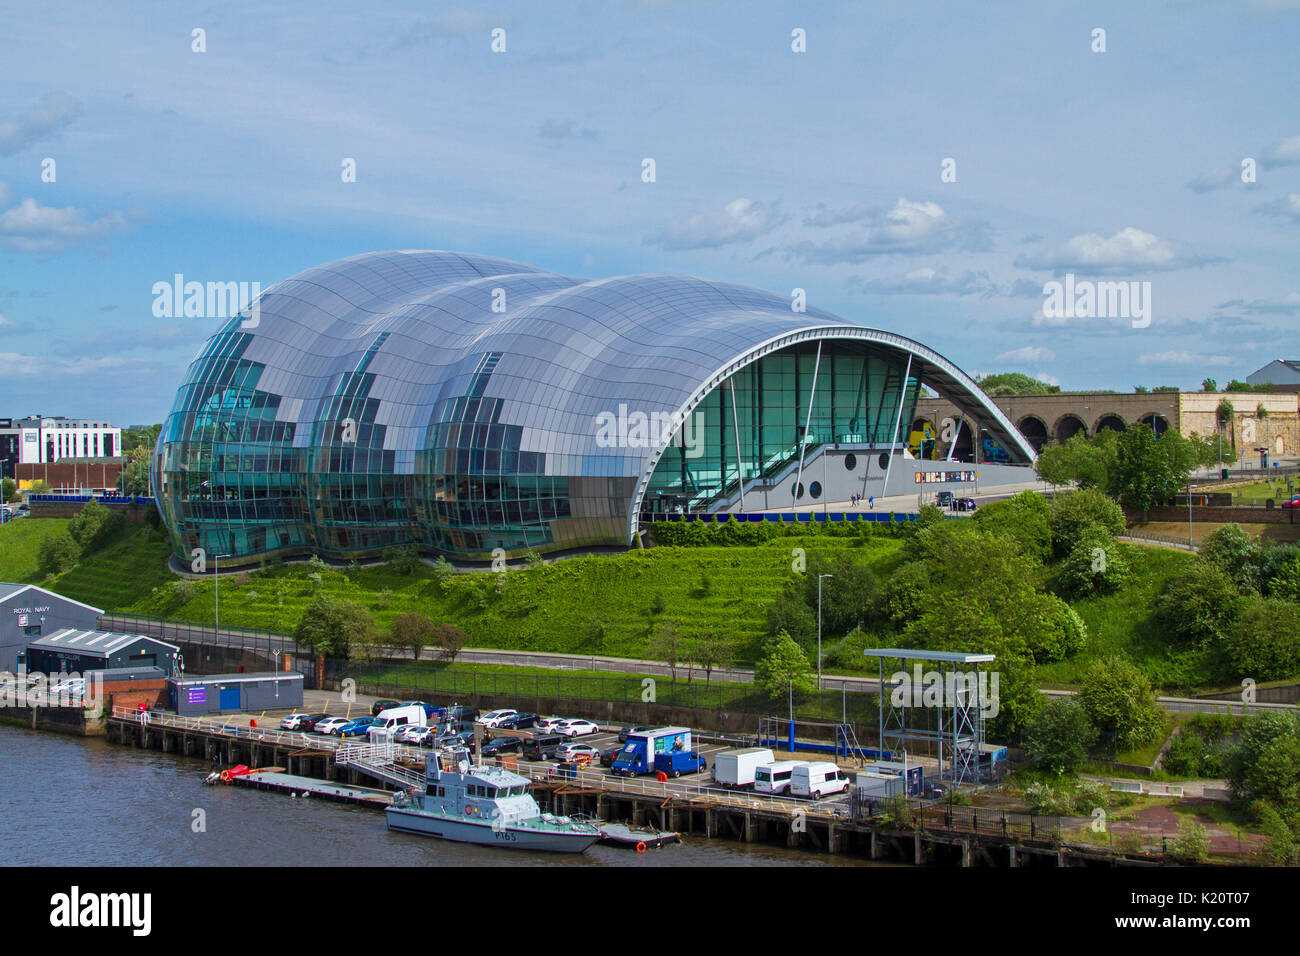 Huge and imposing Gateshead Sage, modern glass building, entertainment venue, beside river and under blue sky at Newcastle-upon-Tyne, England Stock Photo